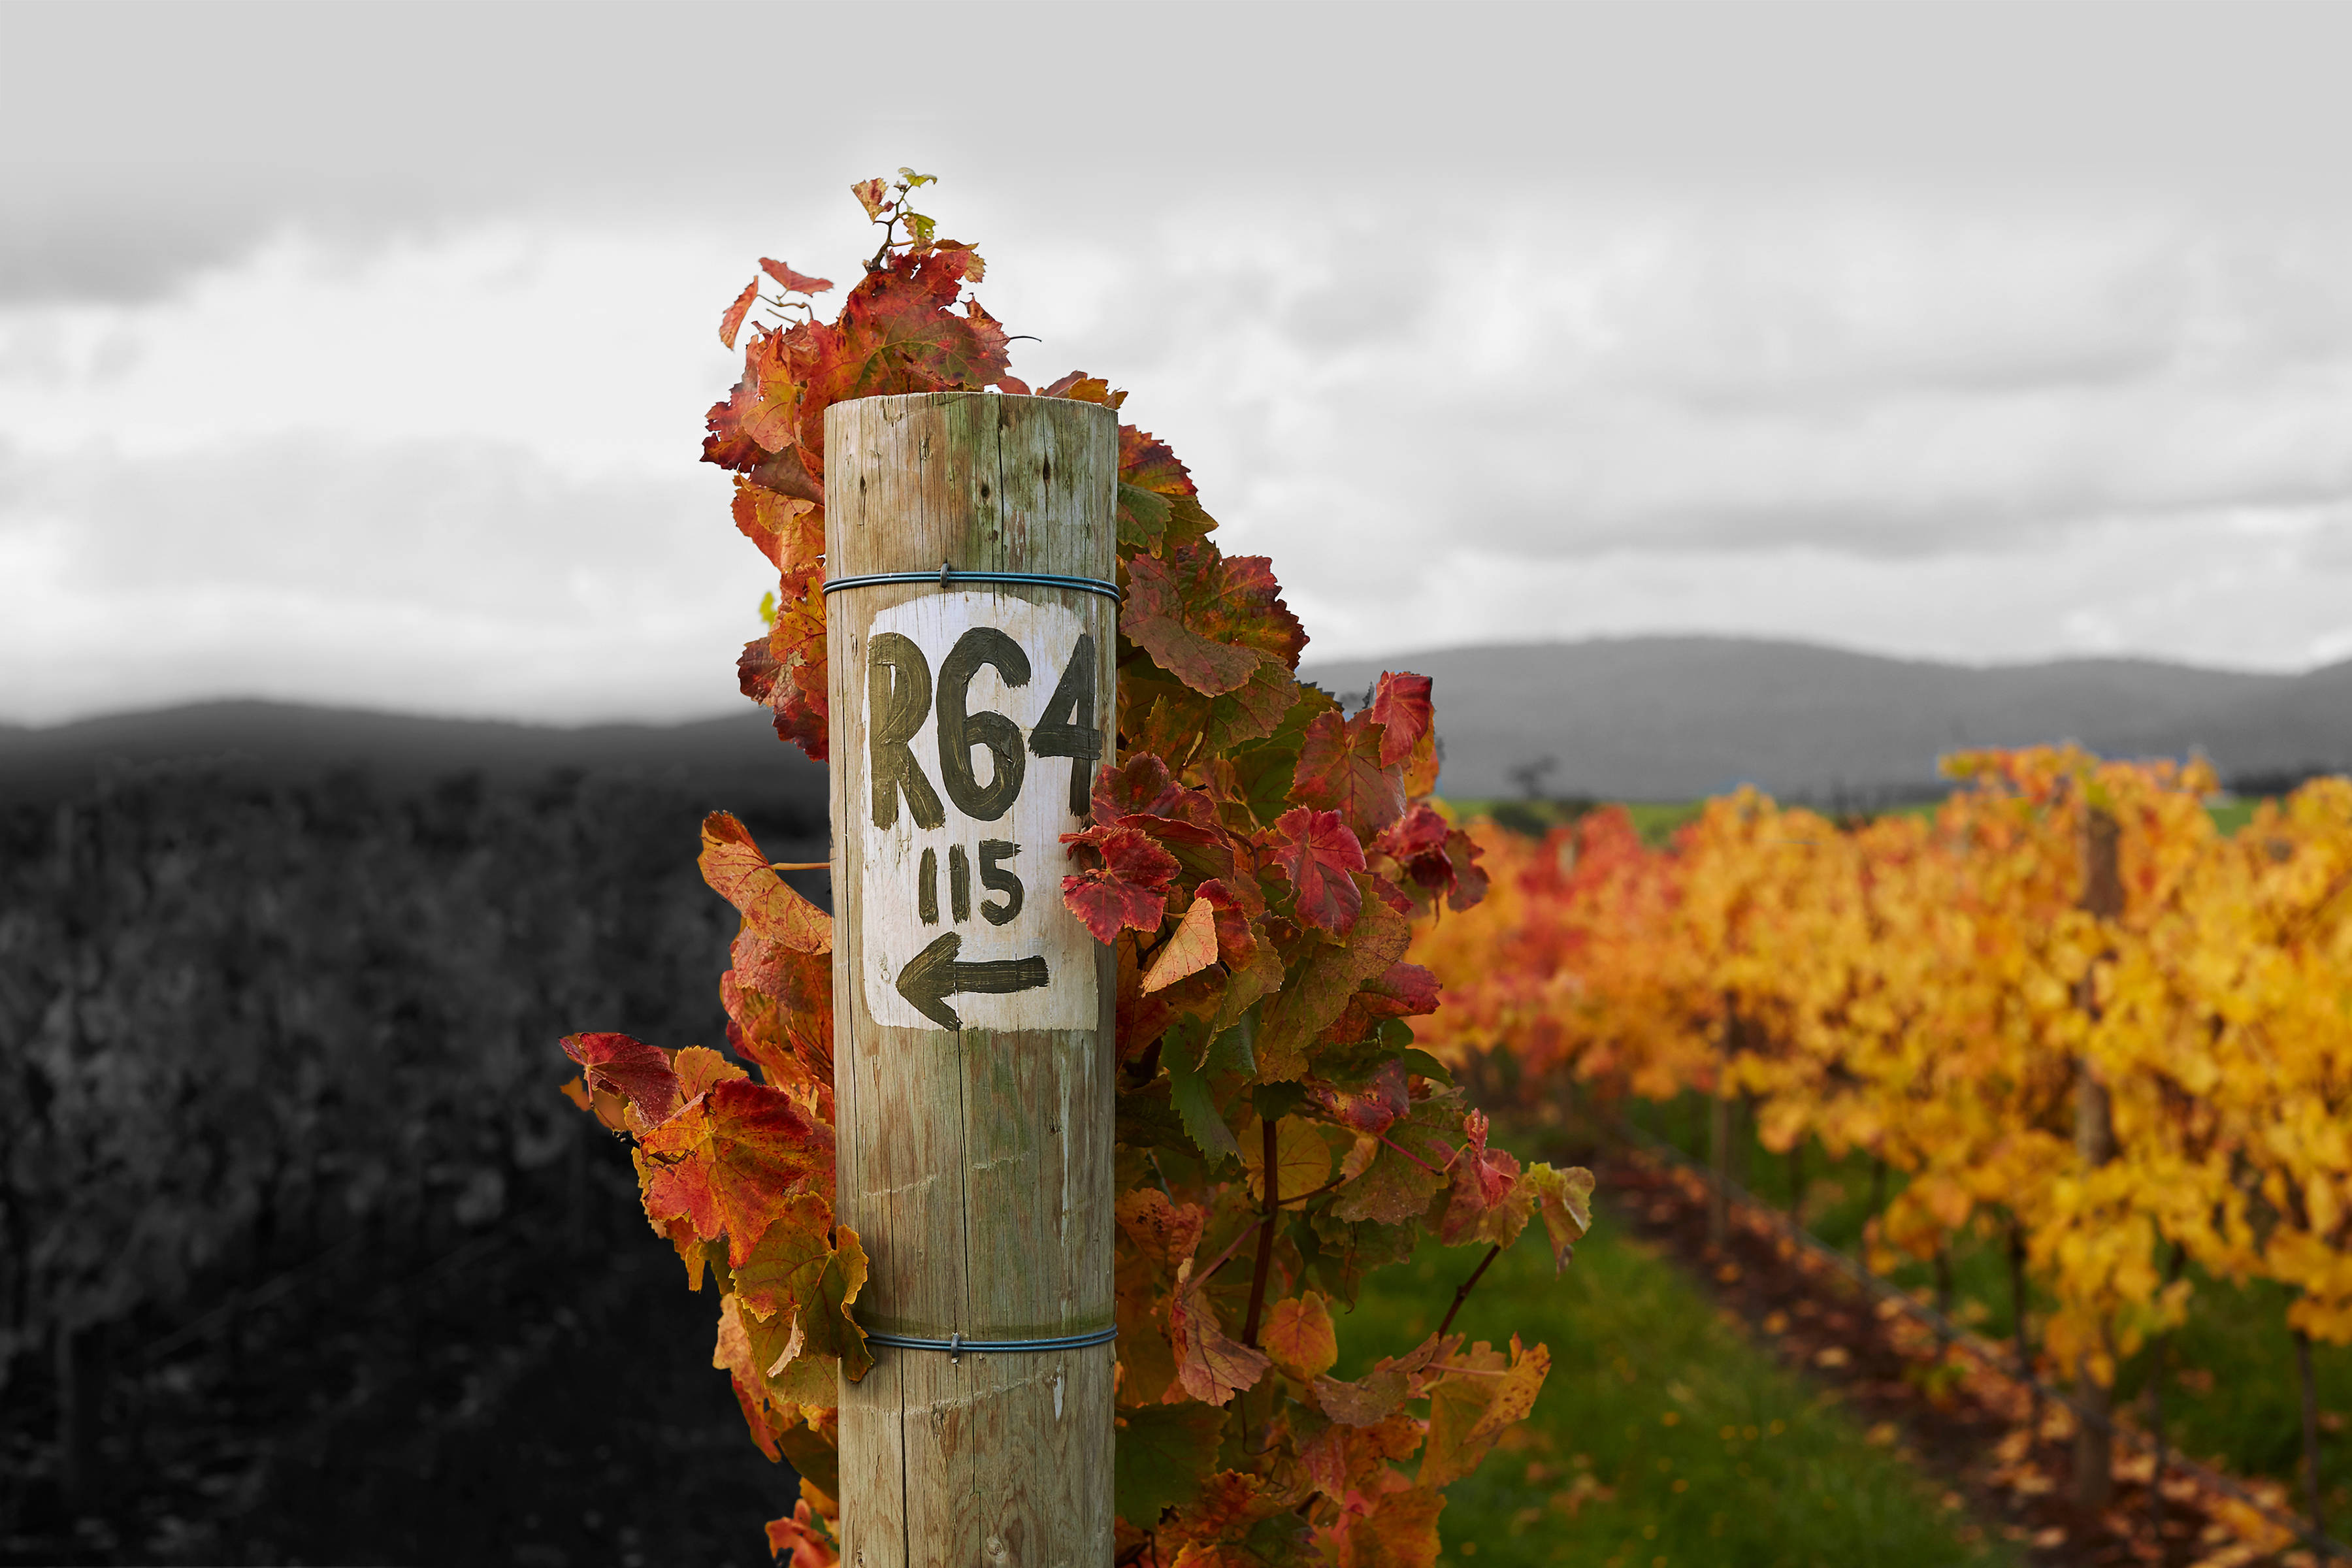 The end post of a vine row from the roadside block, R64, containing Pinot Noir 115 clones. Photo: Renee Hodskiss.